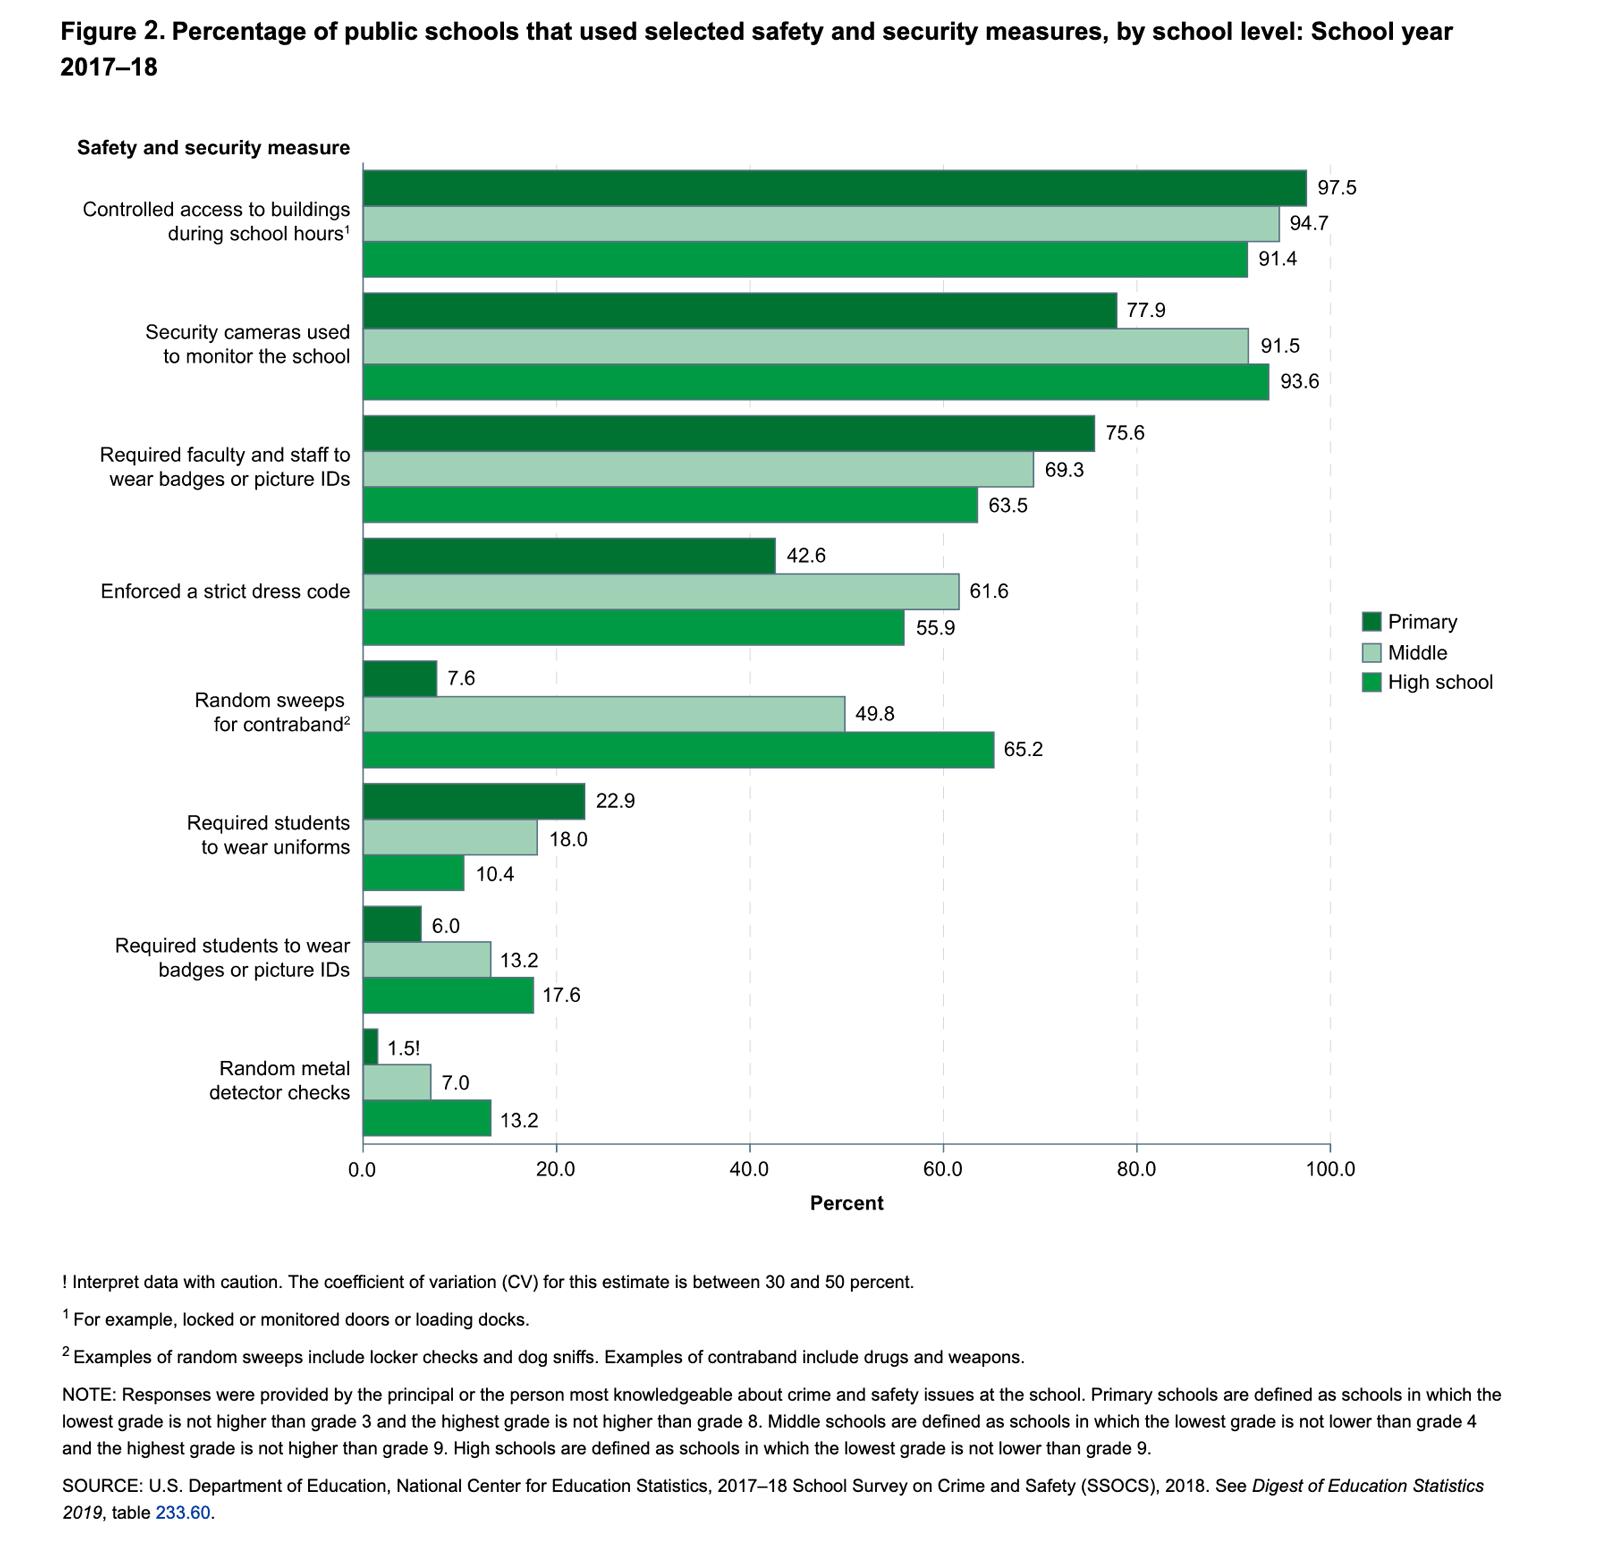 Percentage of public schools that used selected safety and security measures, by school level: School year 2017–18